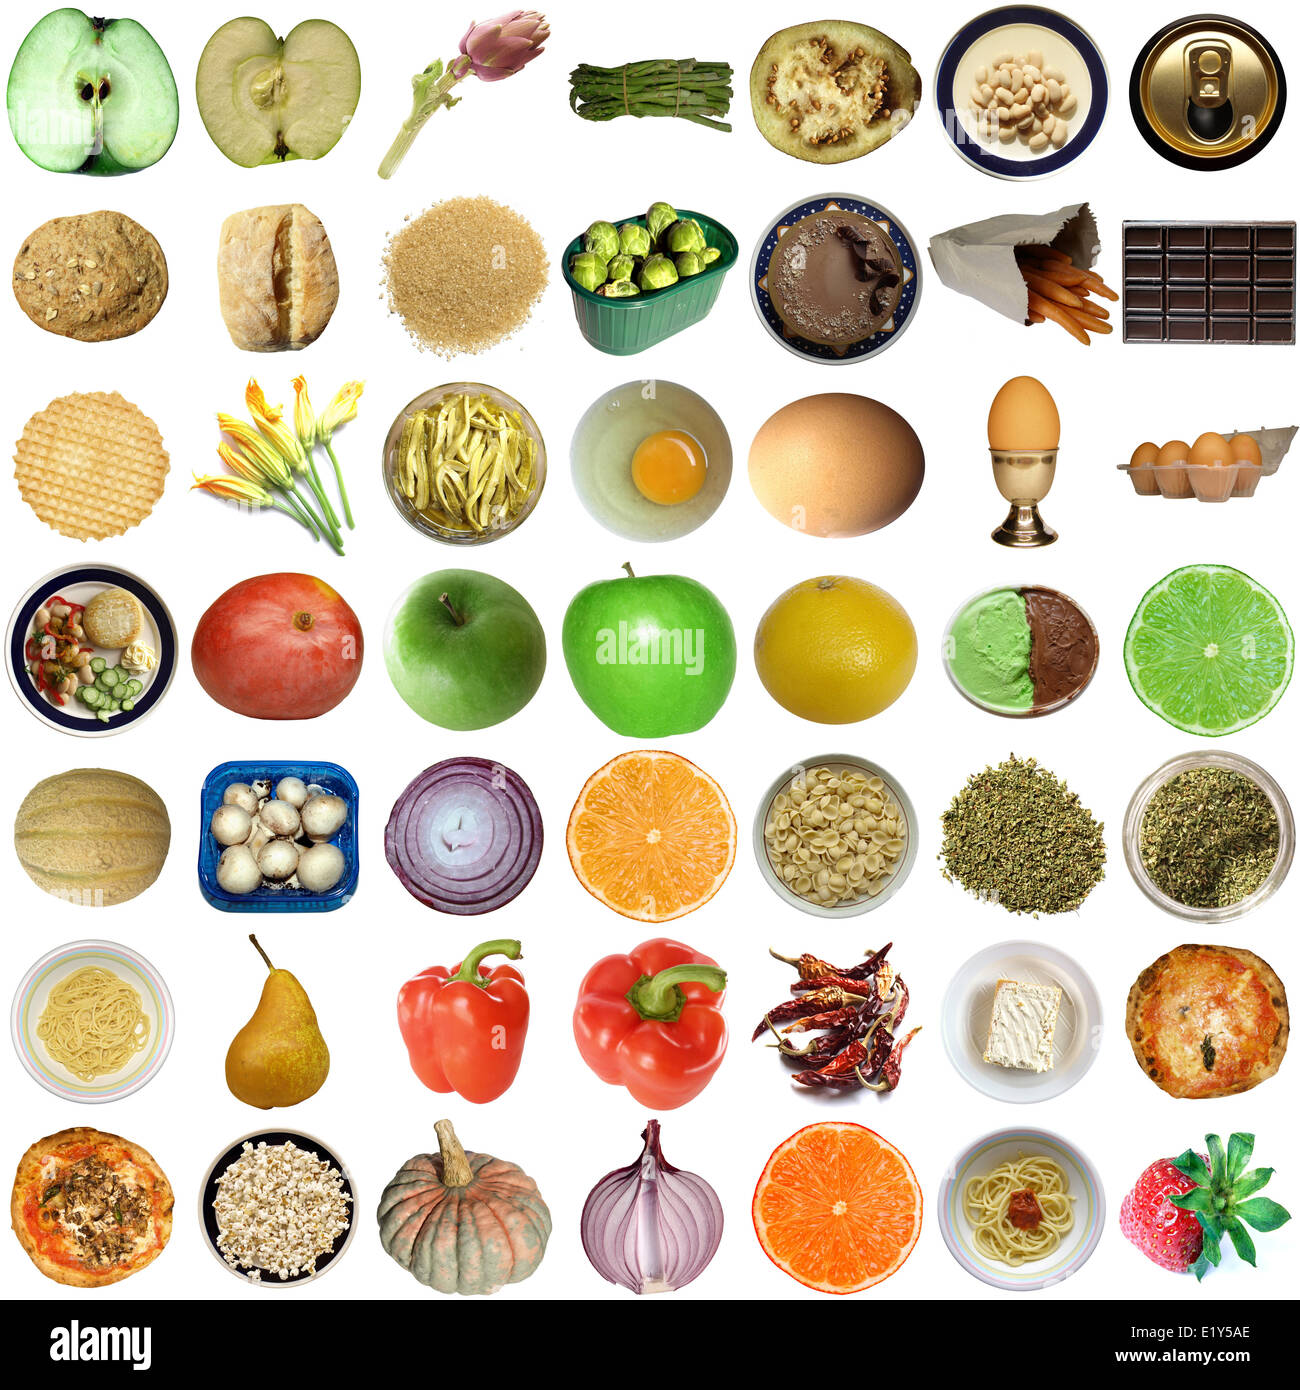 Food collage isolated Stock Photo